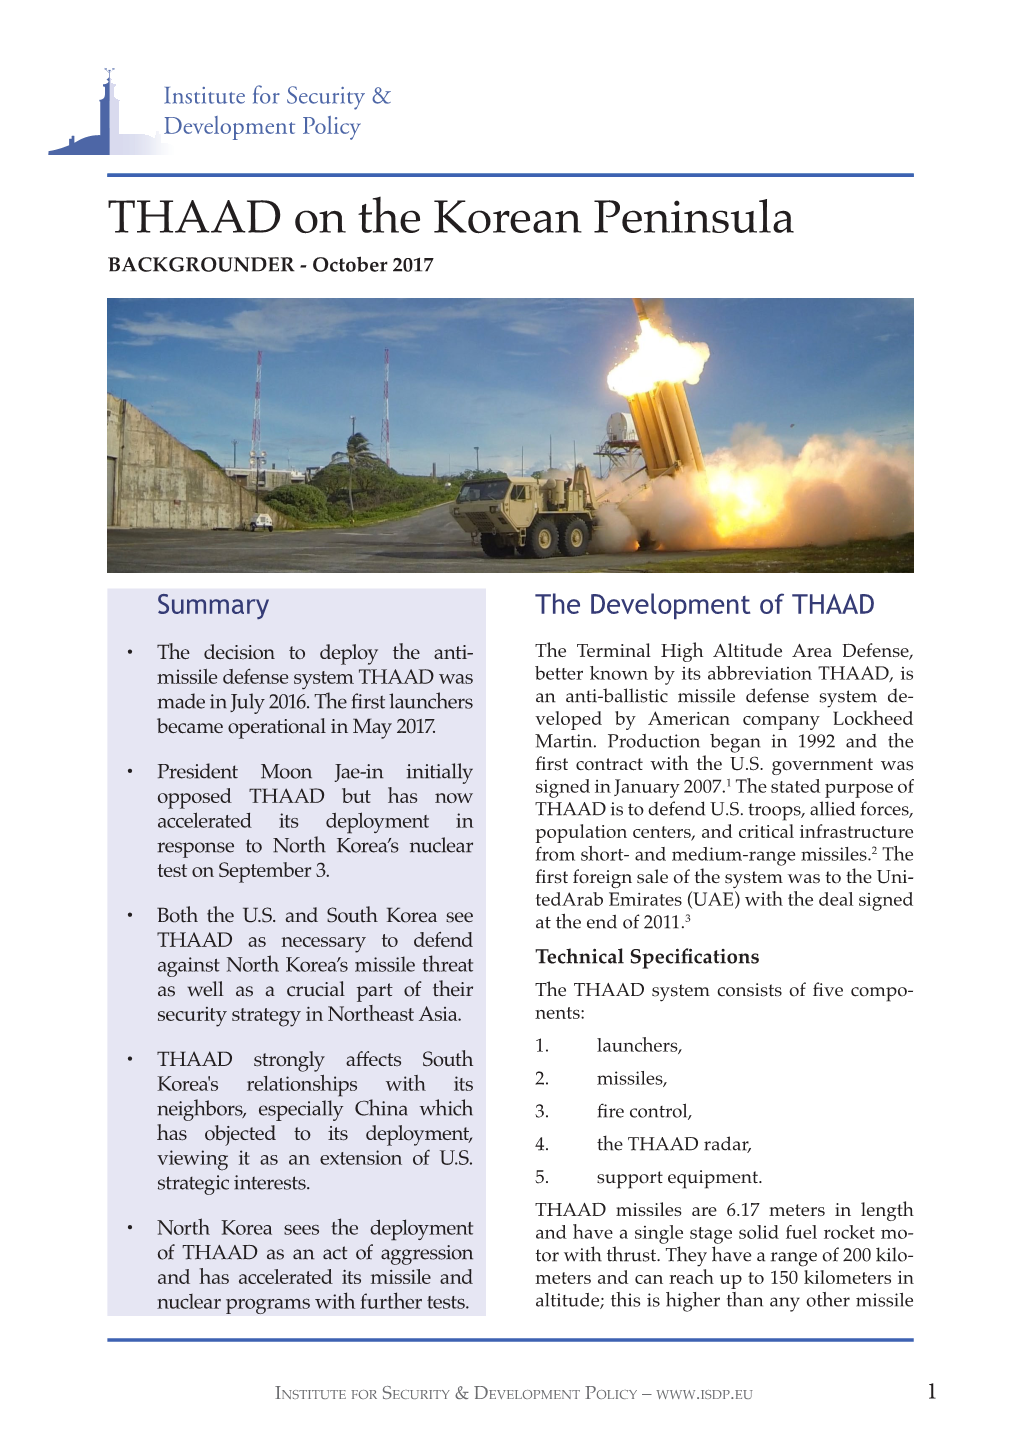 THAAD on the Korean Peninsula BACKGROUNDER - October 2017